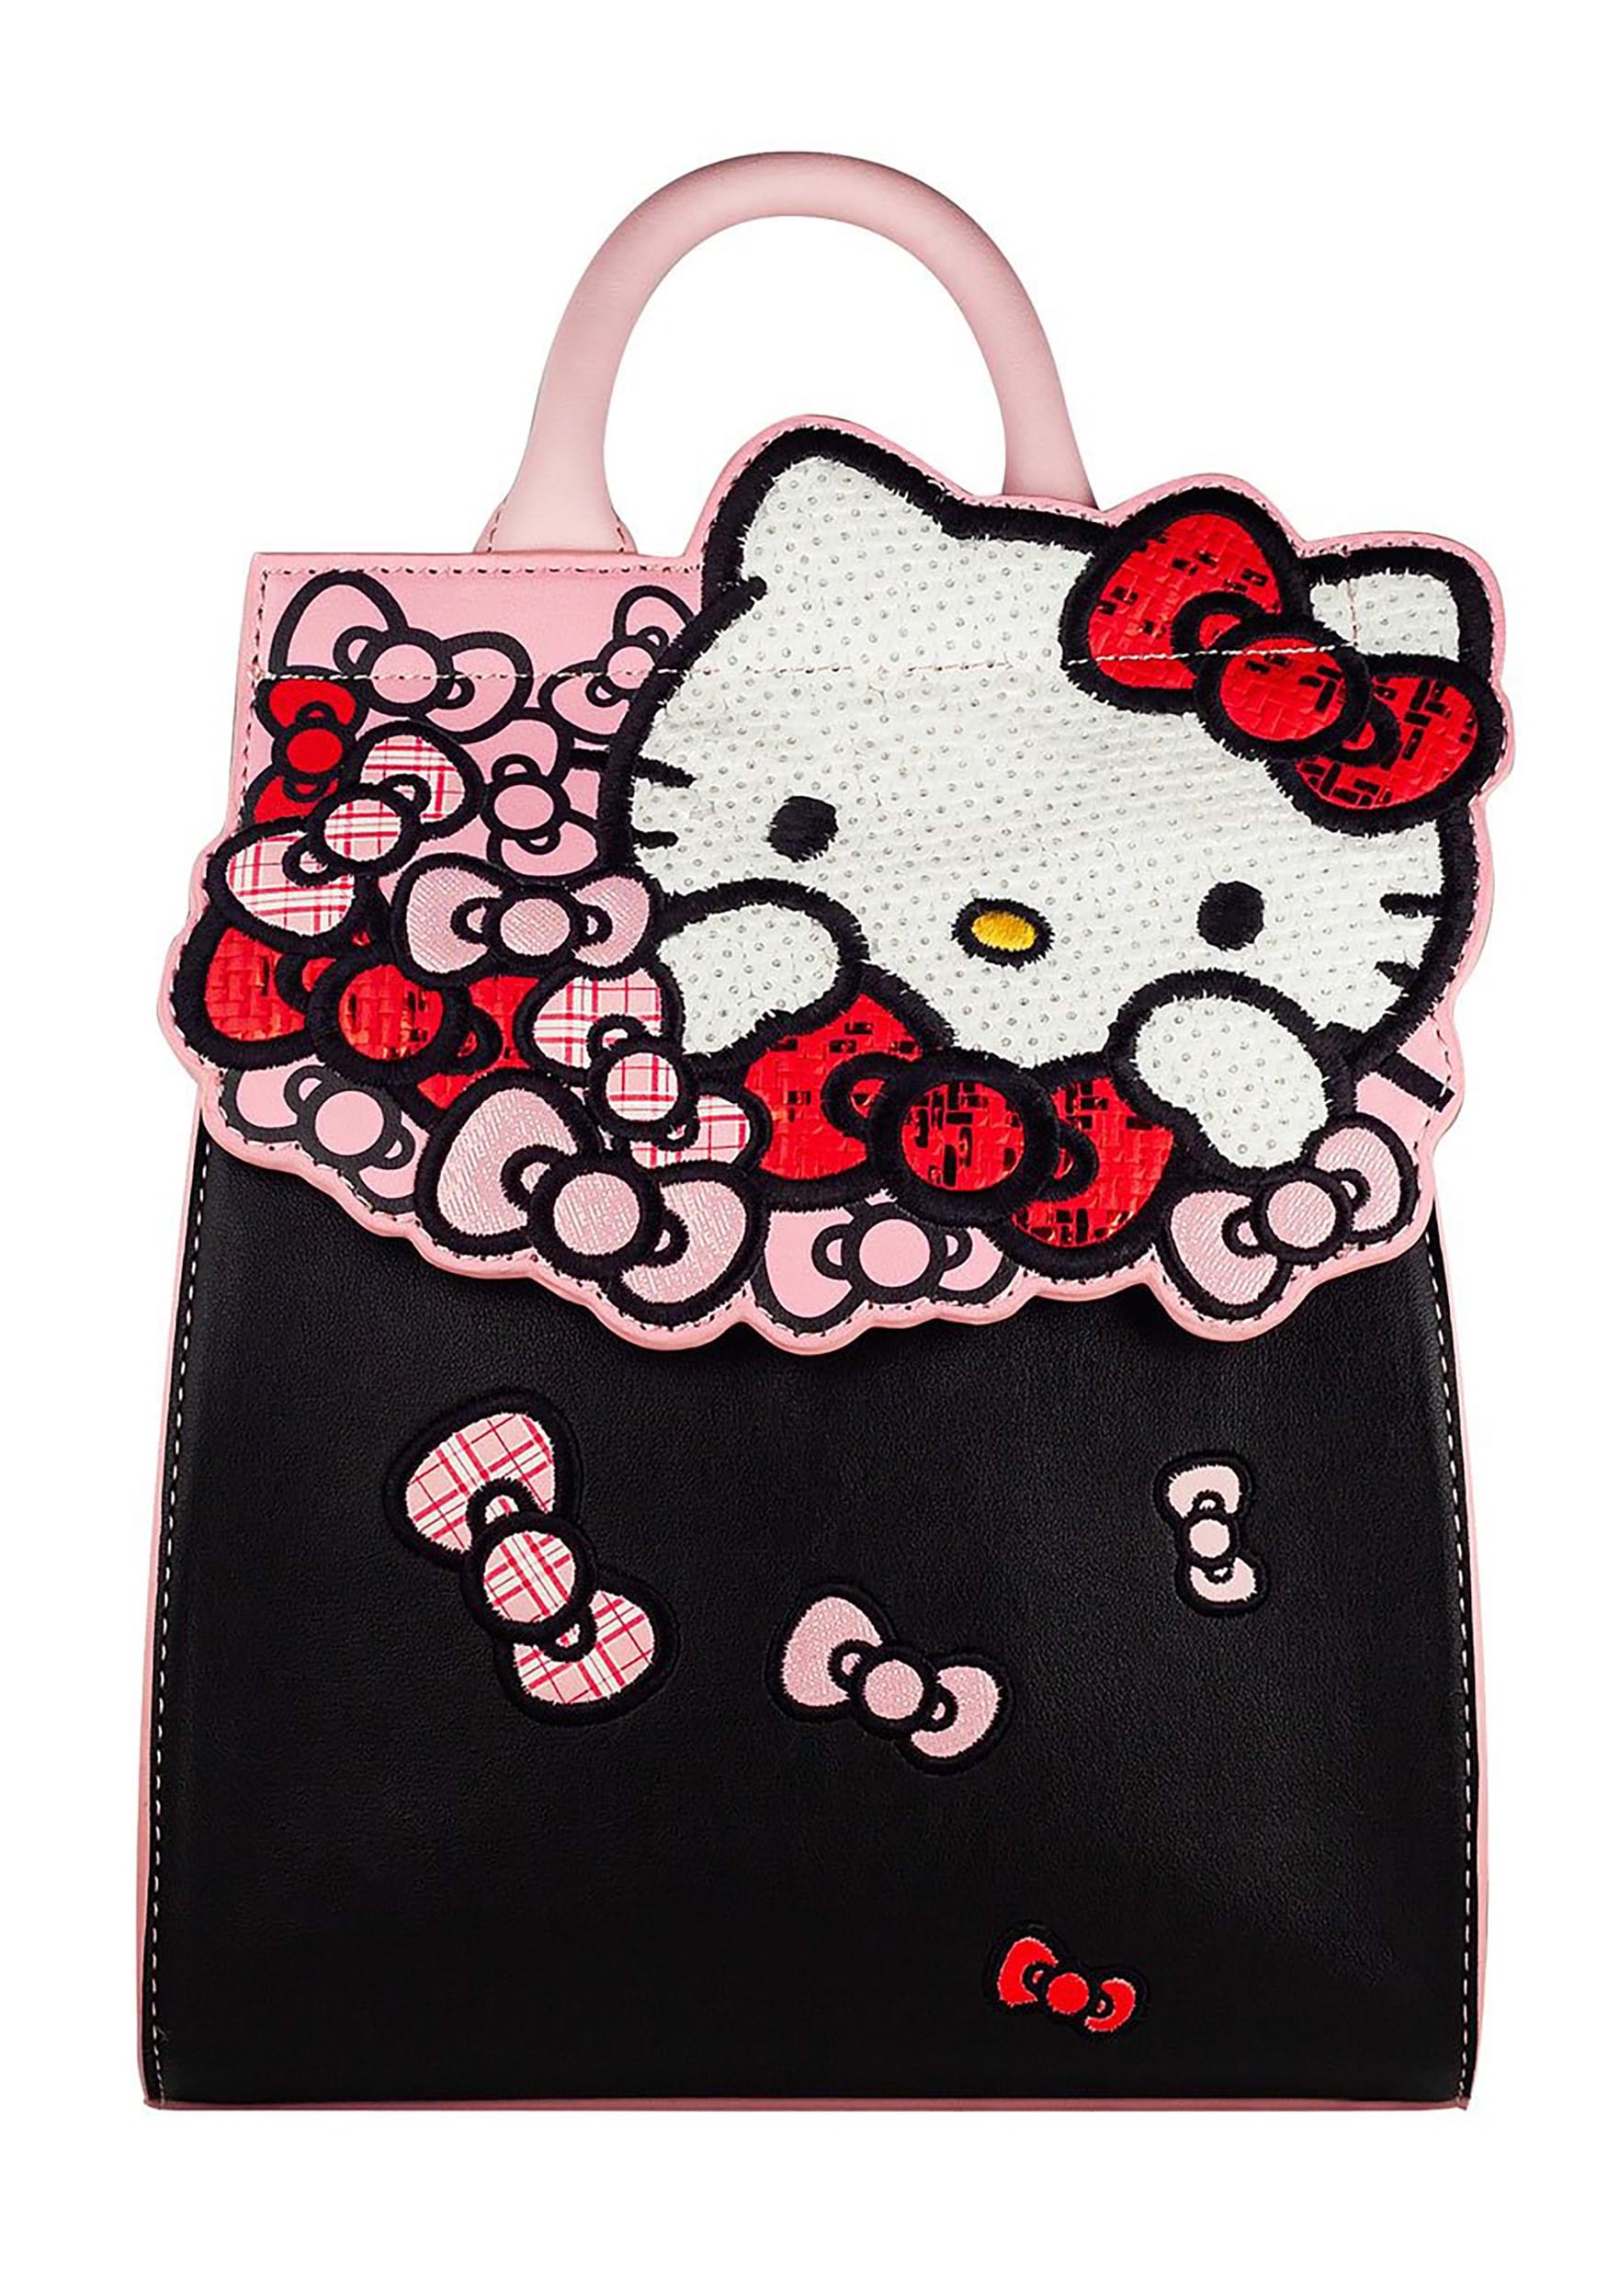 Danielle Nicole Hello Kitty Pink Bows Backpack